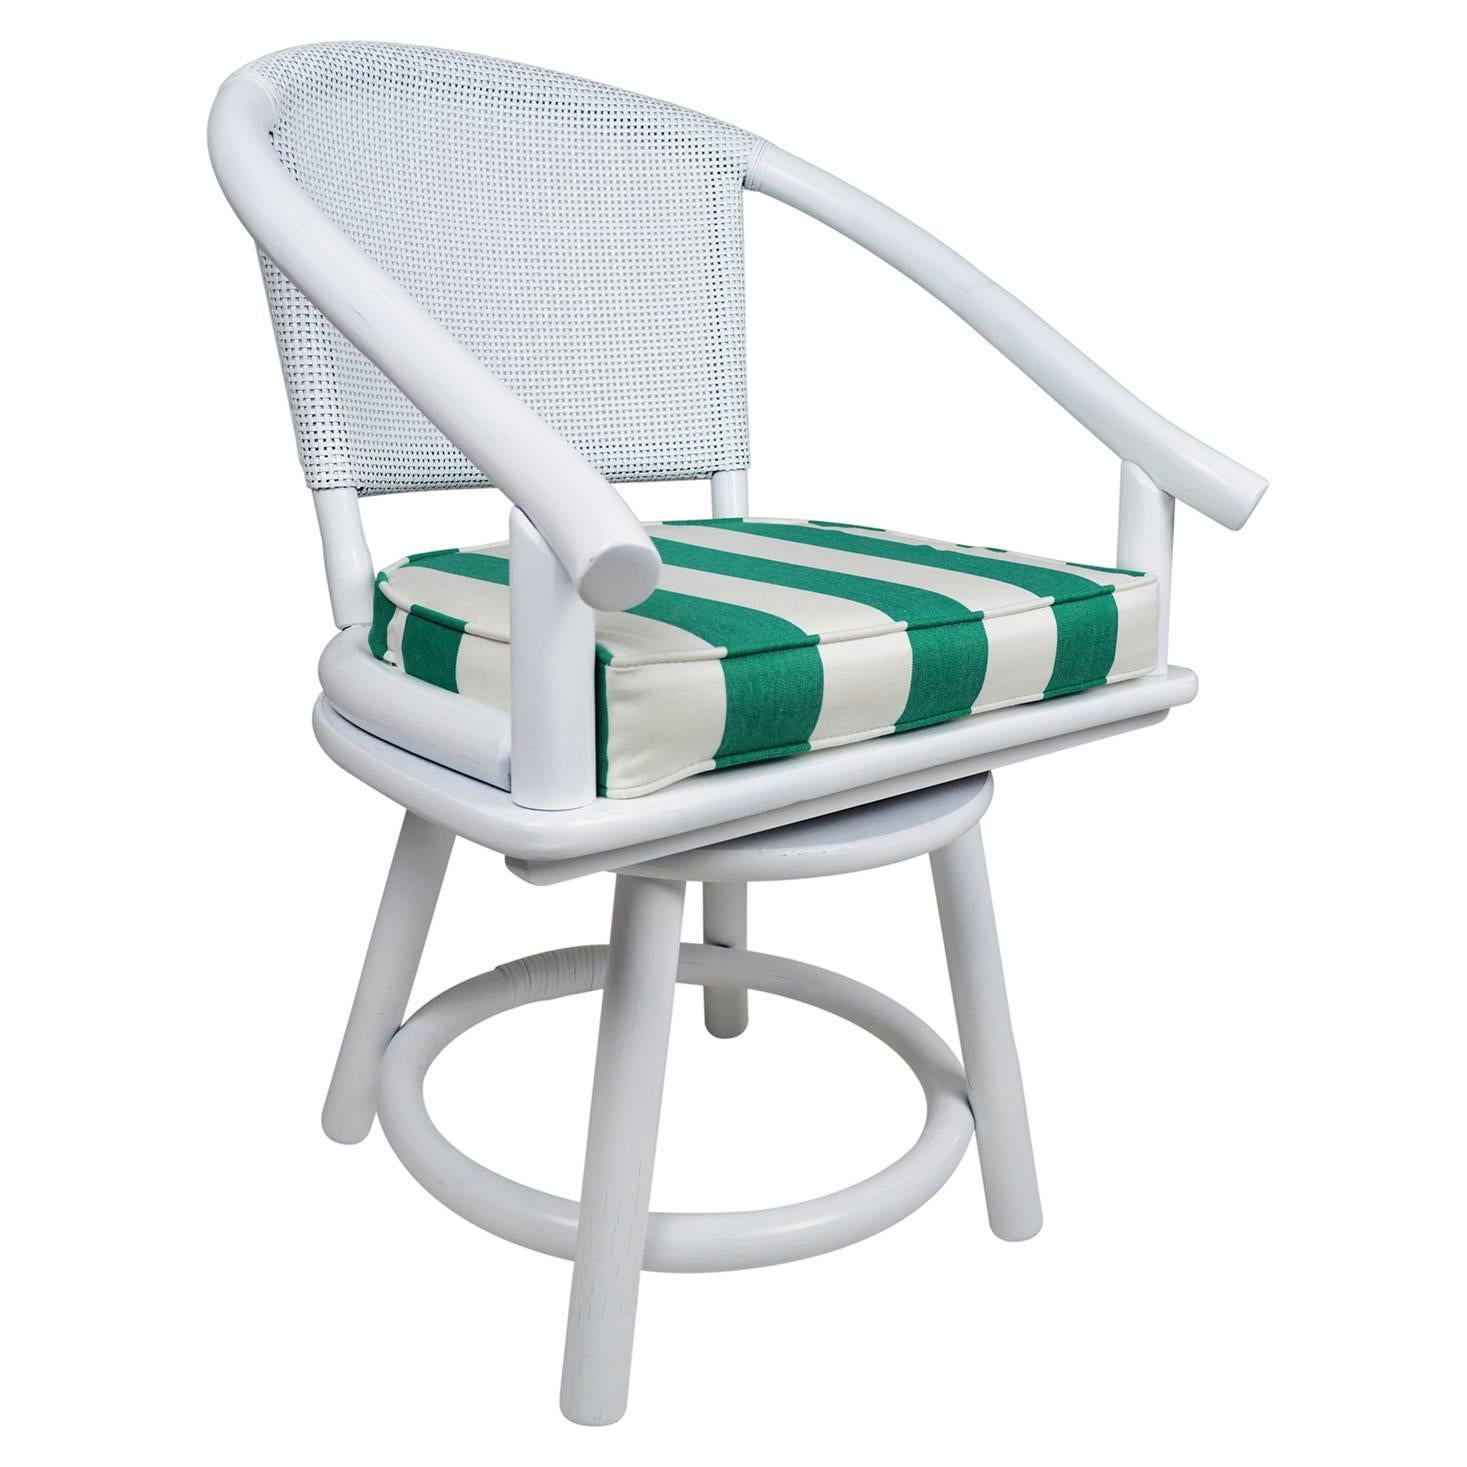 Vintage Ficks Reed swivel chairs newly lacquered in white. The removable cushions are newly upholstered in an emerald green and white stripe indoor/outdoor fabric.